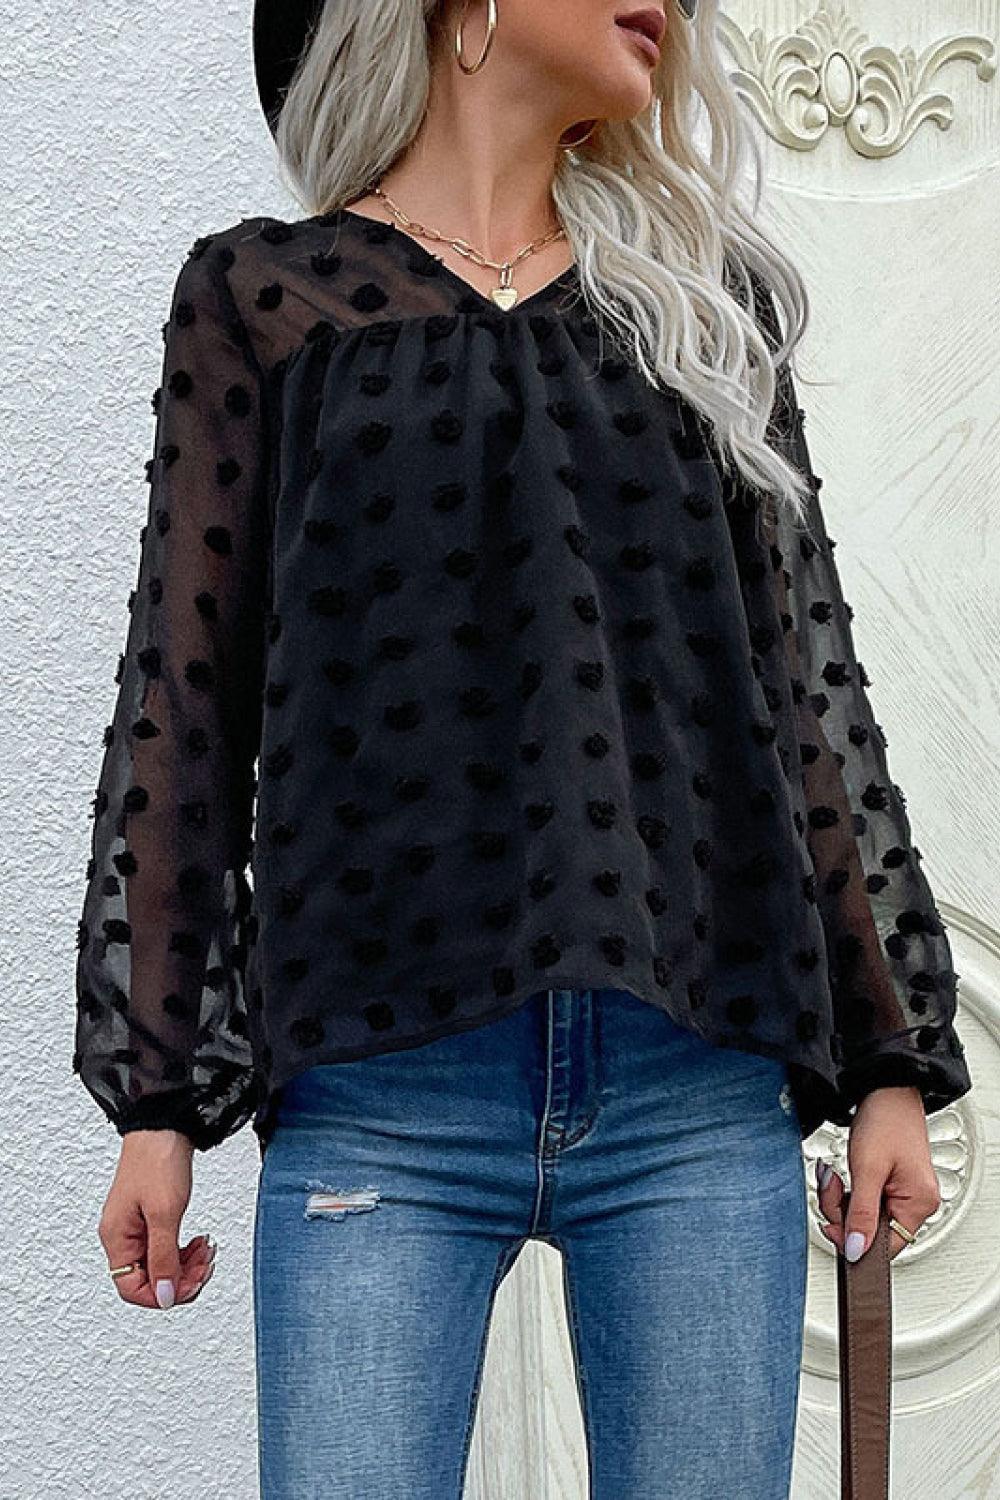 Outfit of the Day Black Swiss Dot Blouse - MXSTUDIO.COM